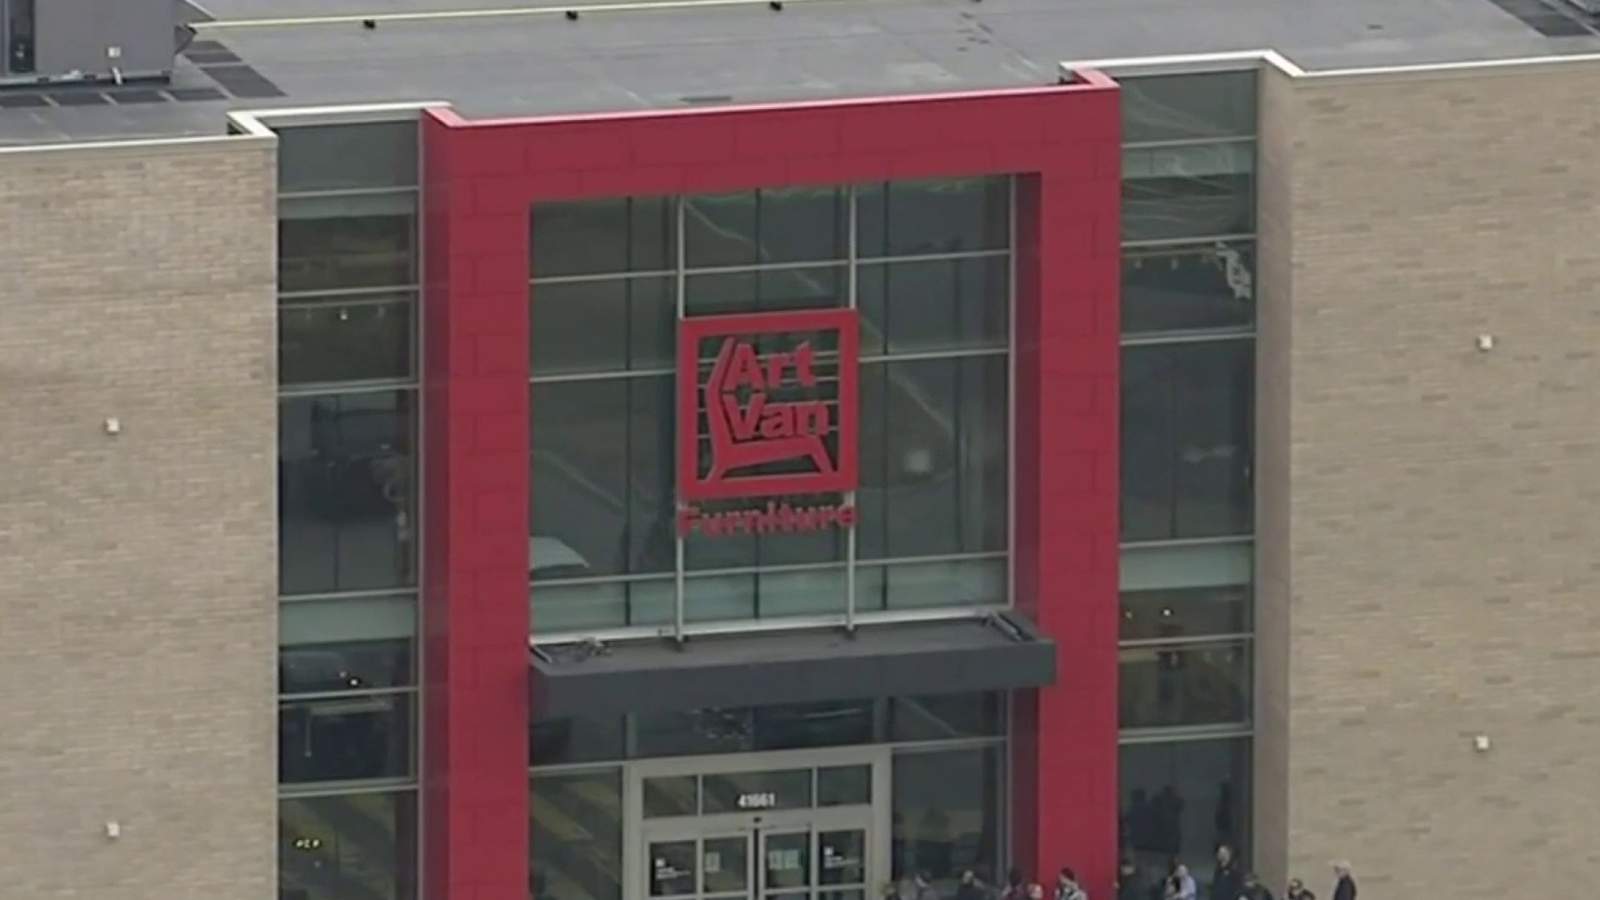 All Art Van employees laid off Friday due to coronavirus closing stores, company says